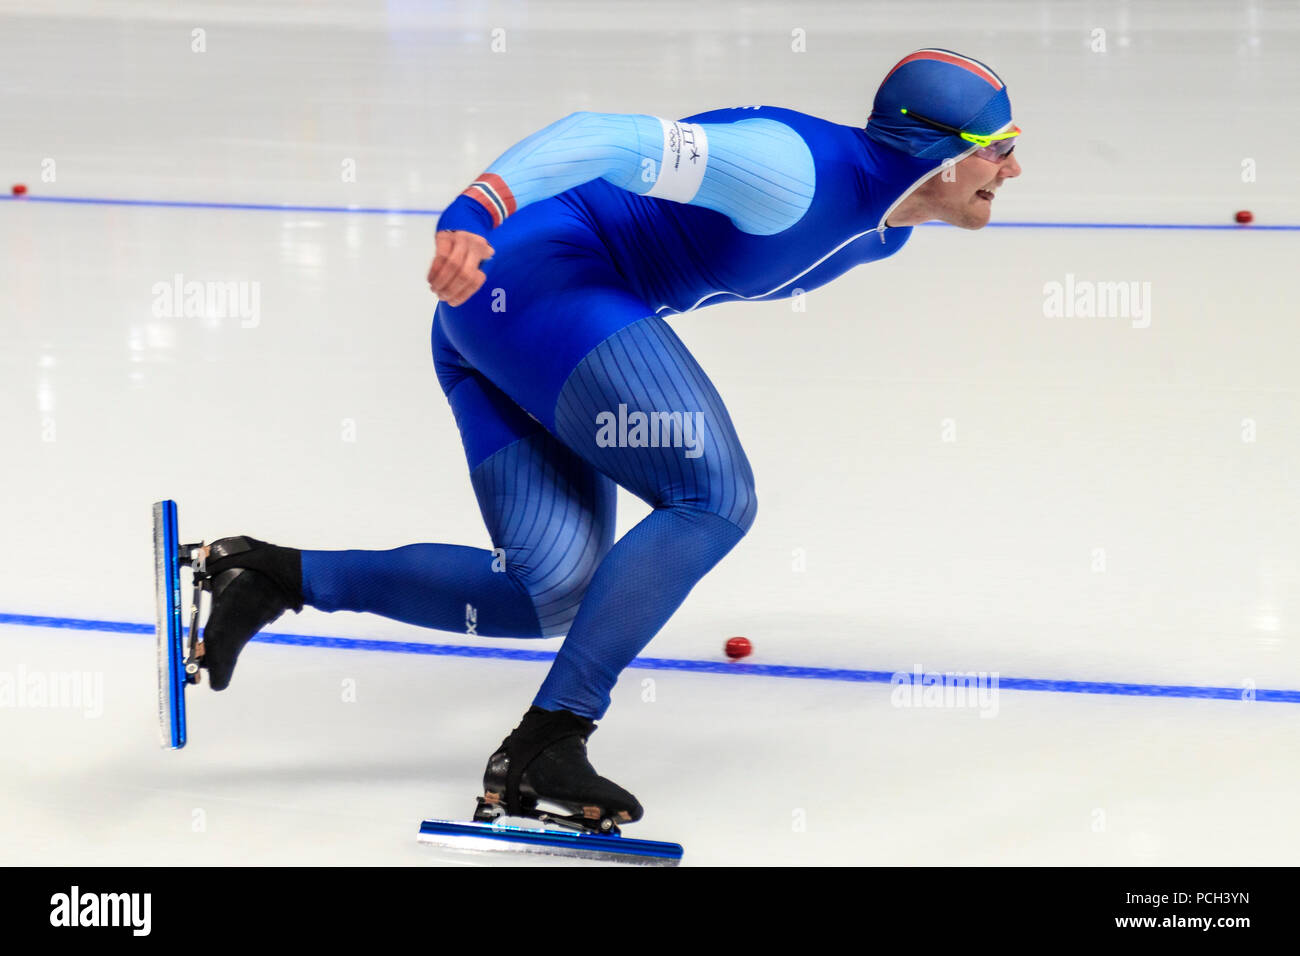 Competing in the Speed Skating - Mens' 500m at the Olympic Winter Games PyeongChang 2018 Stock Photo